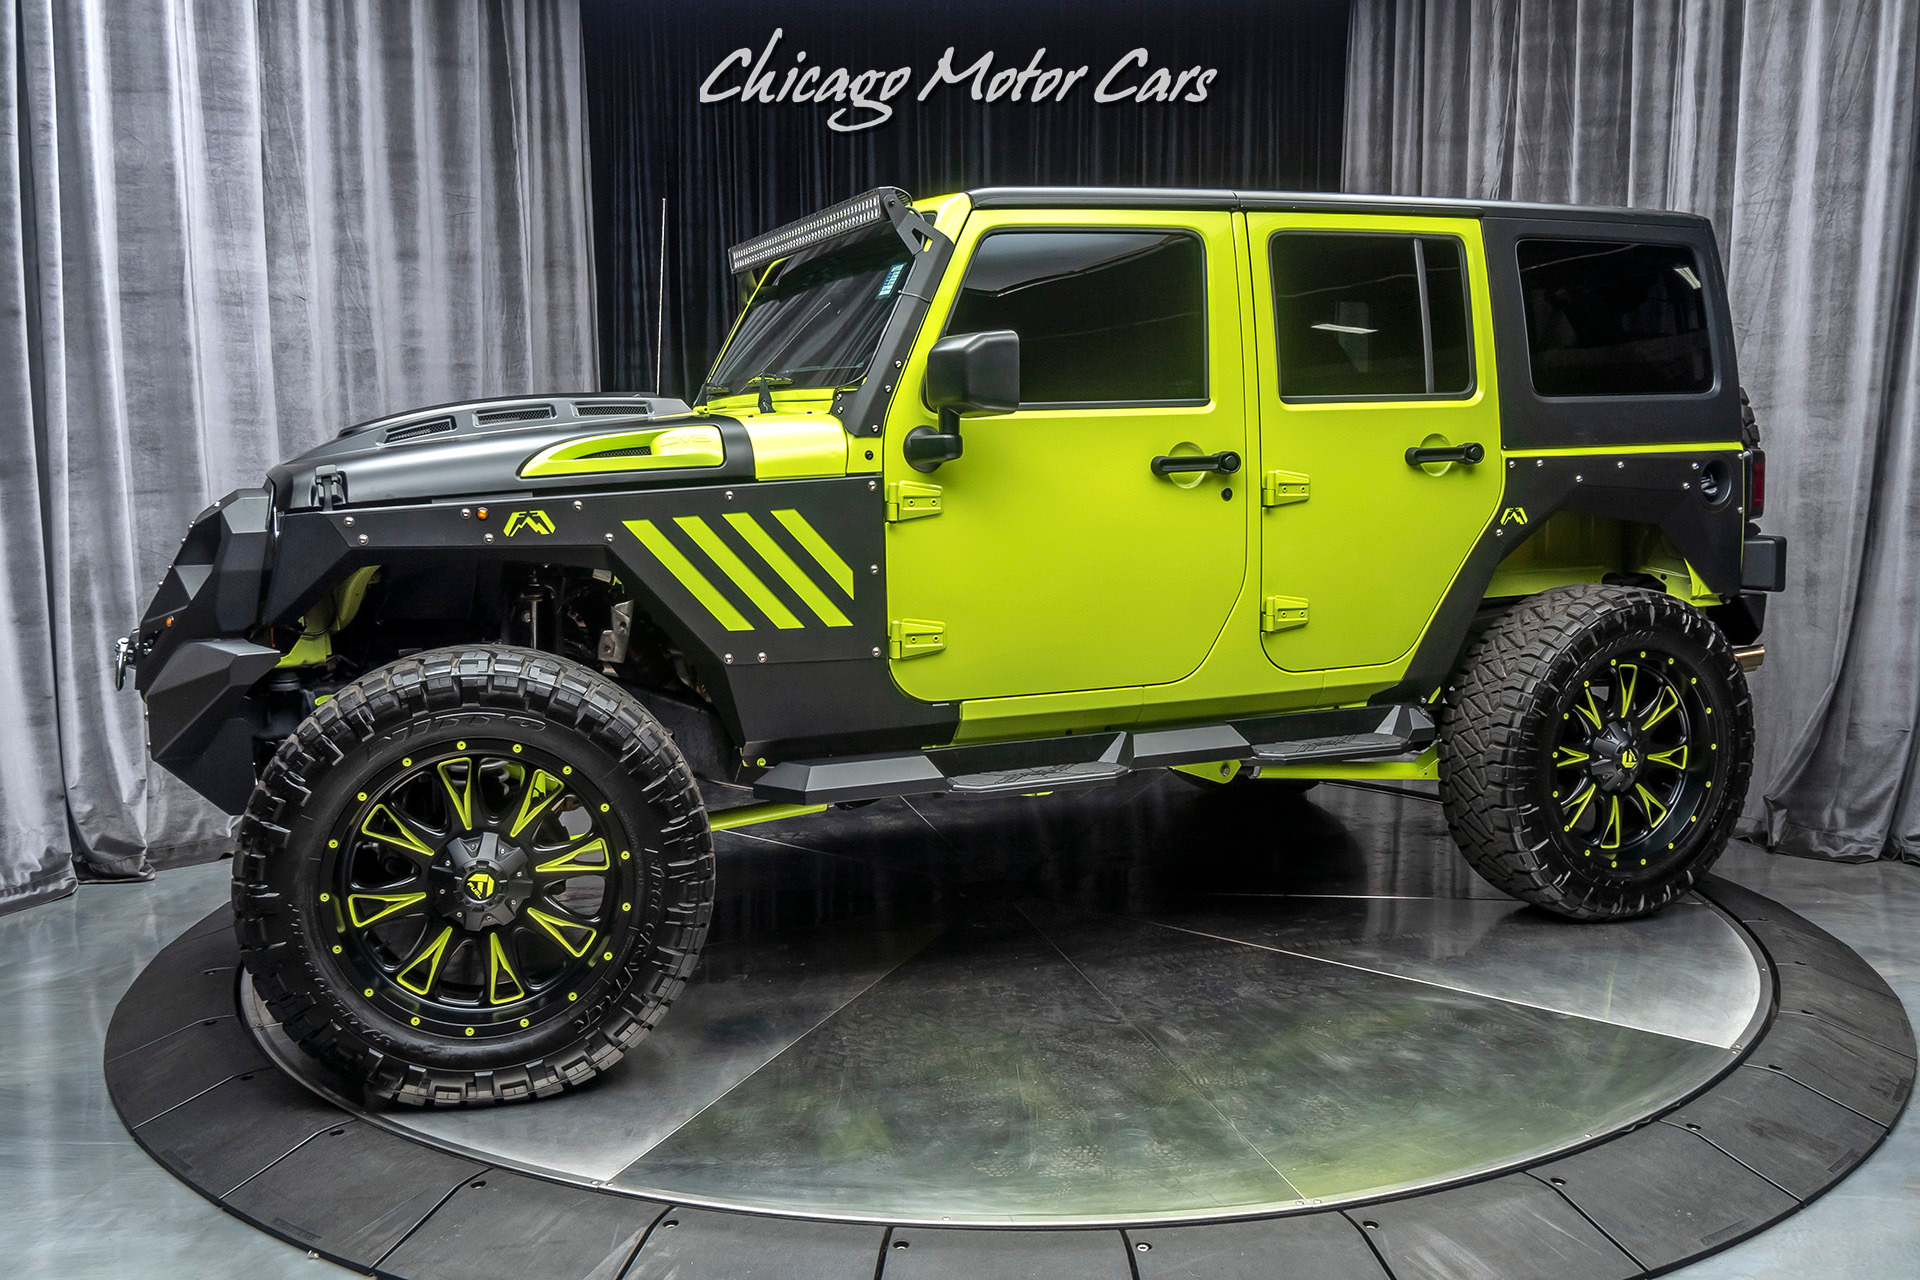 Used 2016 Jeep Wrangler Unlimited Rubicon Only 2k Miles! $30k+ in UPGRADES!  For Sale (Special Pricing) | Chicago Motor Cars Stock #16030E